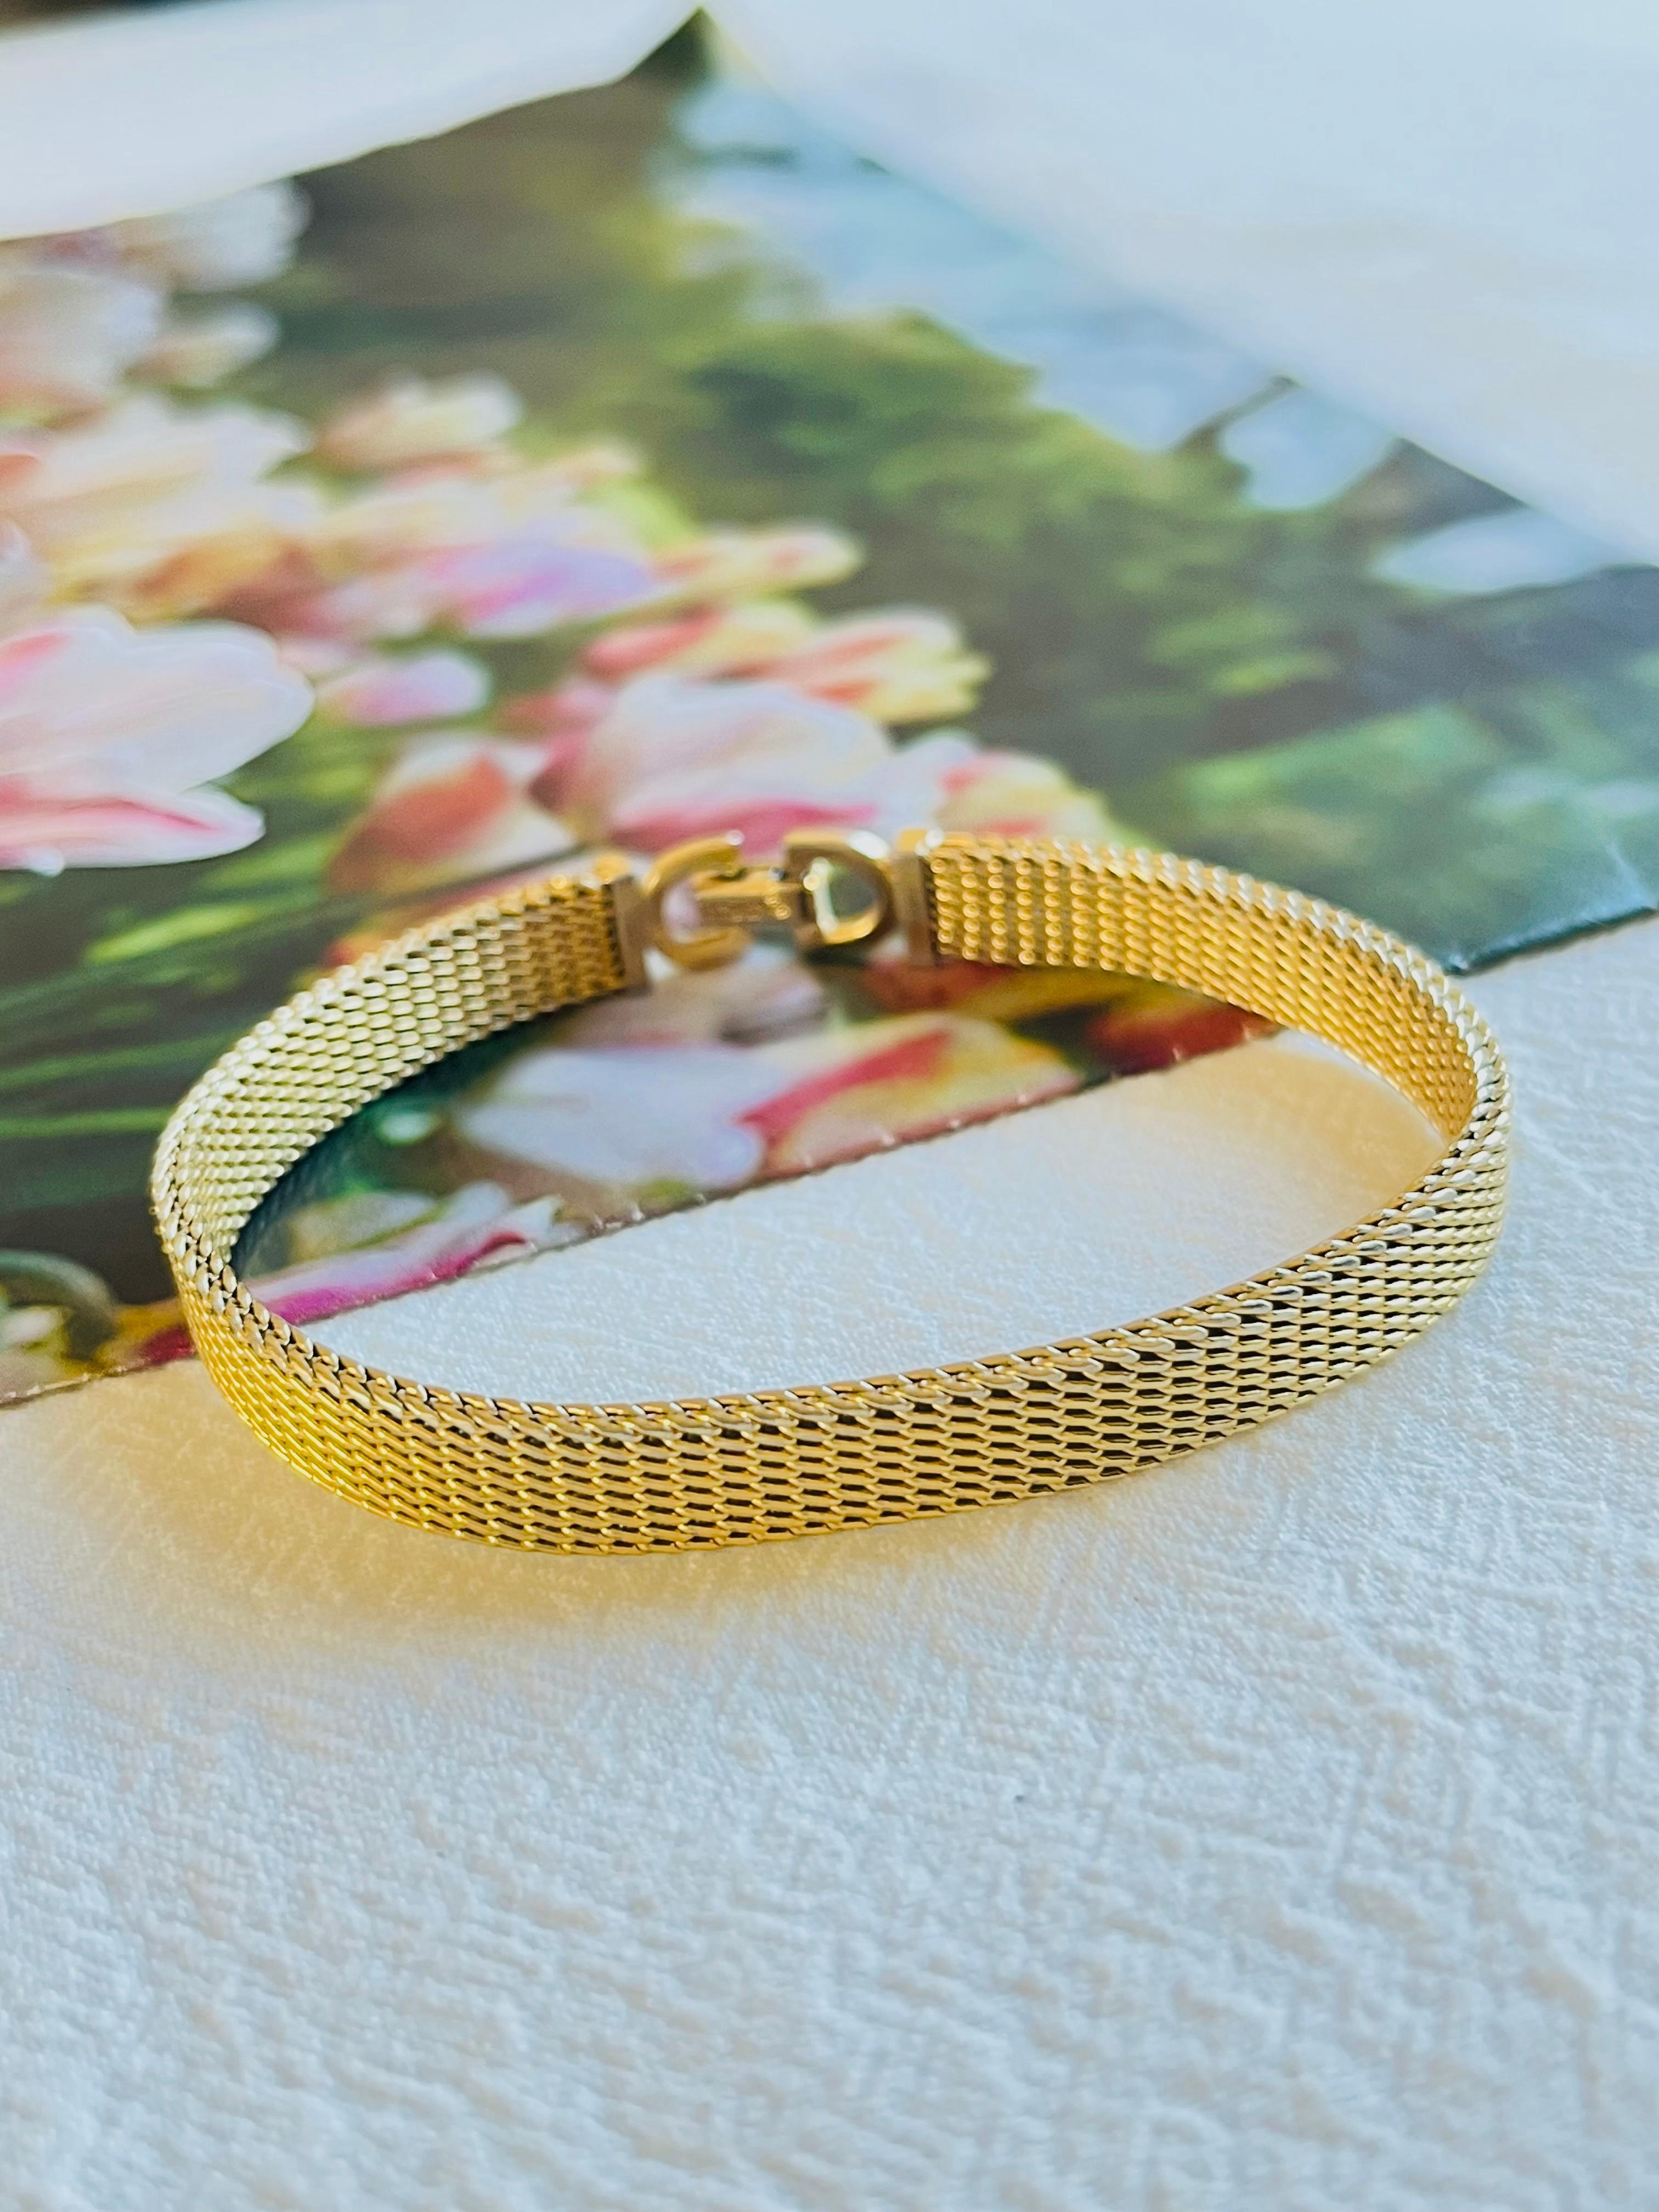 Christian Dior Vintage 1970s Unisex Ridged Woven Mesh Modernist Cuff Bracelet, Gold Tone

A very beautiful bracelet by Chr. DIOR, signed at the back.

Very good condition. Light colour loss inside, barely noticeable. 100% Genuine.

Size: 17.5 *0.8